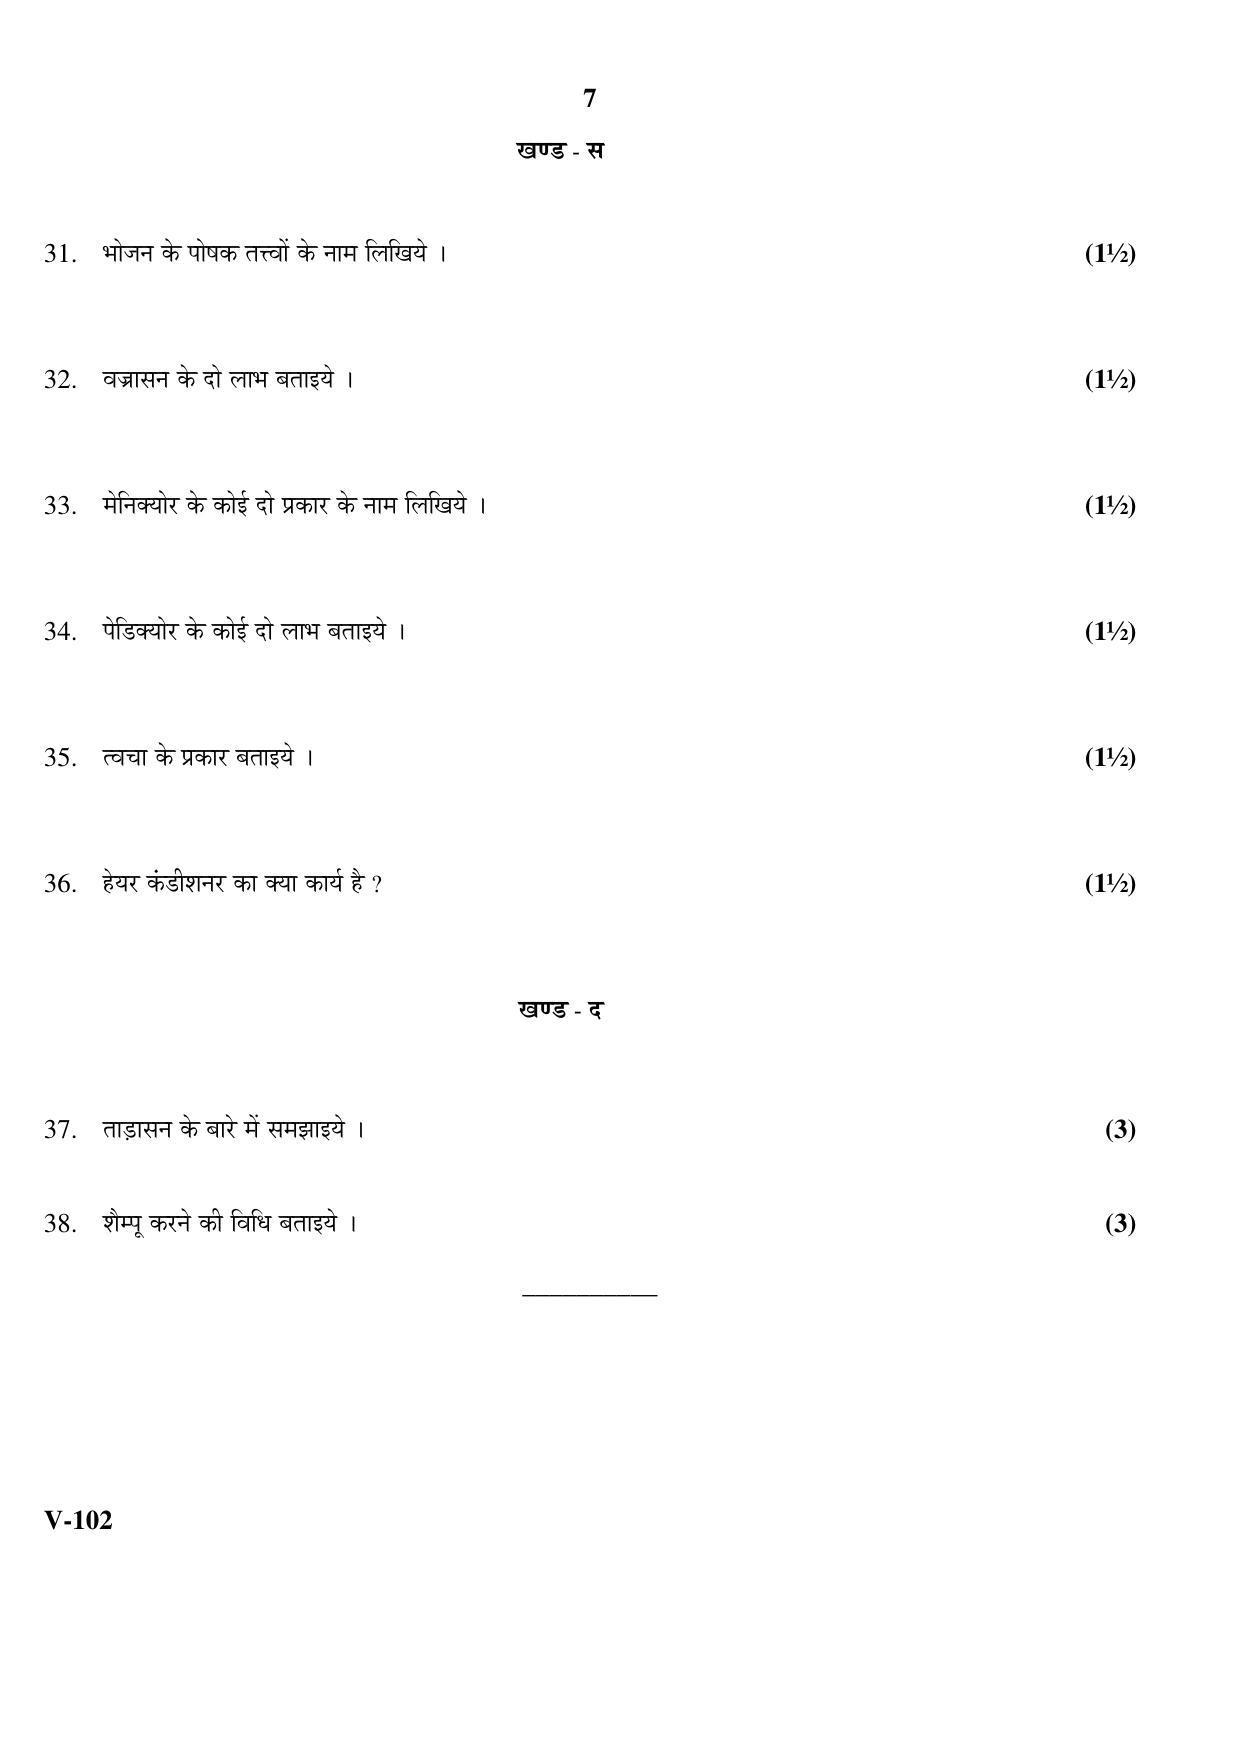 RBSE 2017 Class 10 Beauty-Health (Vocational) Question Paper - Page 7